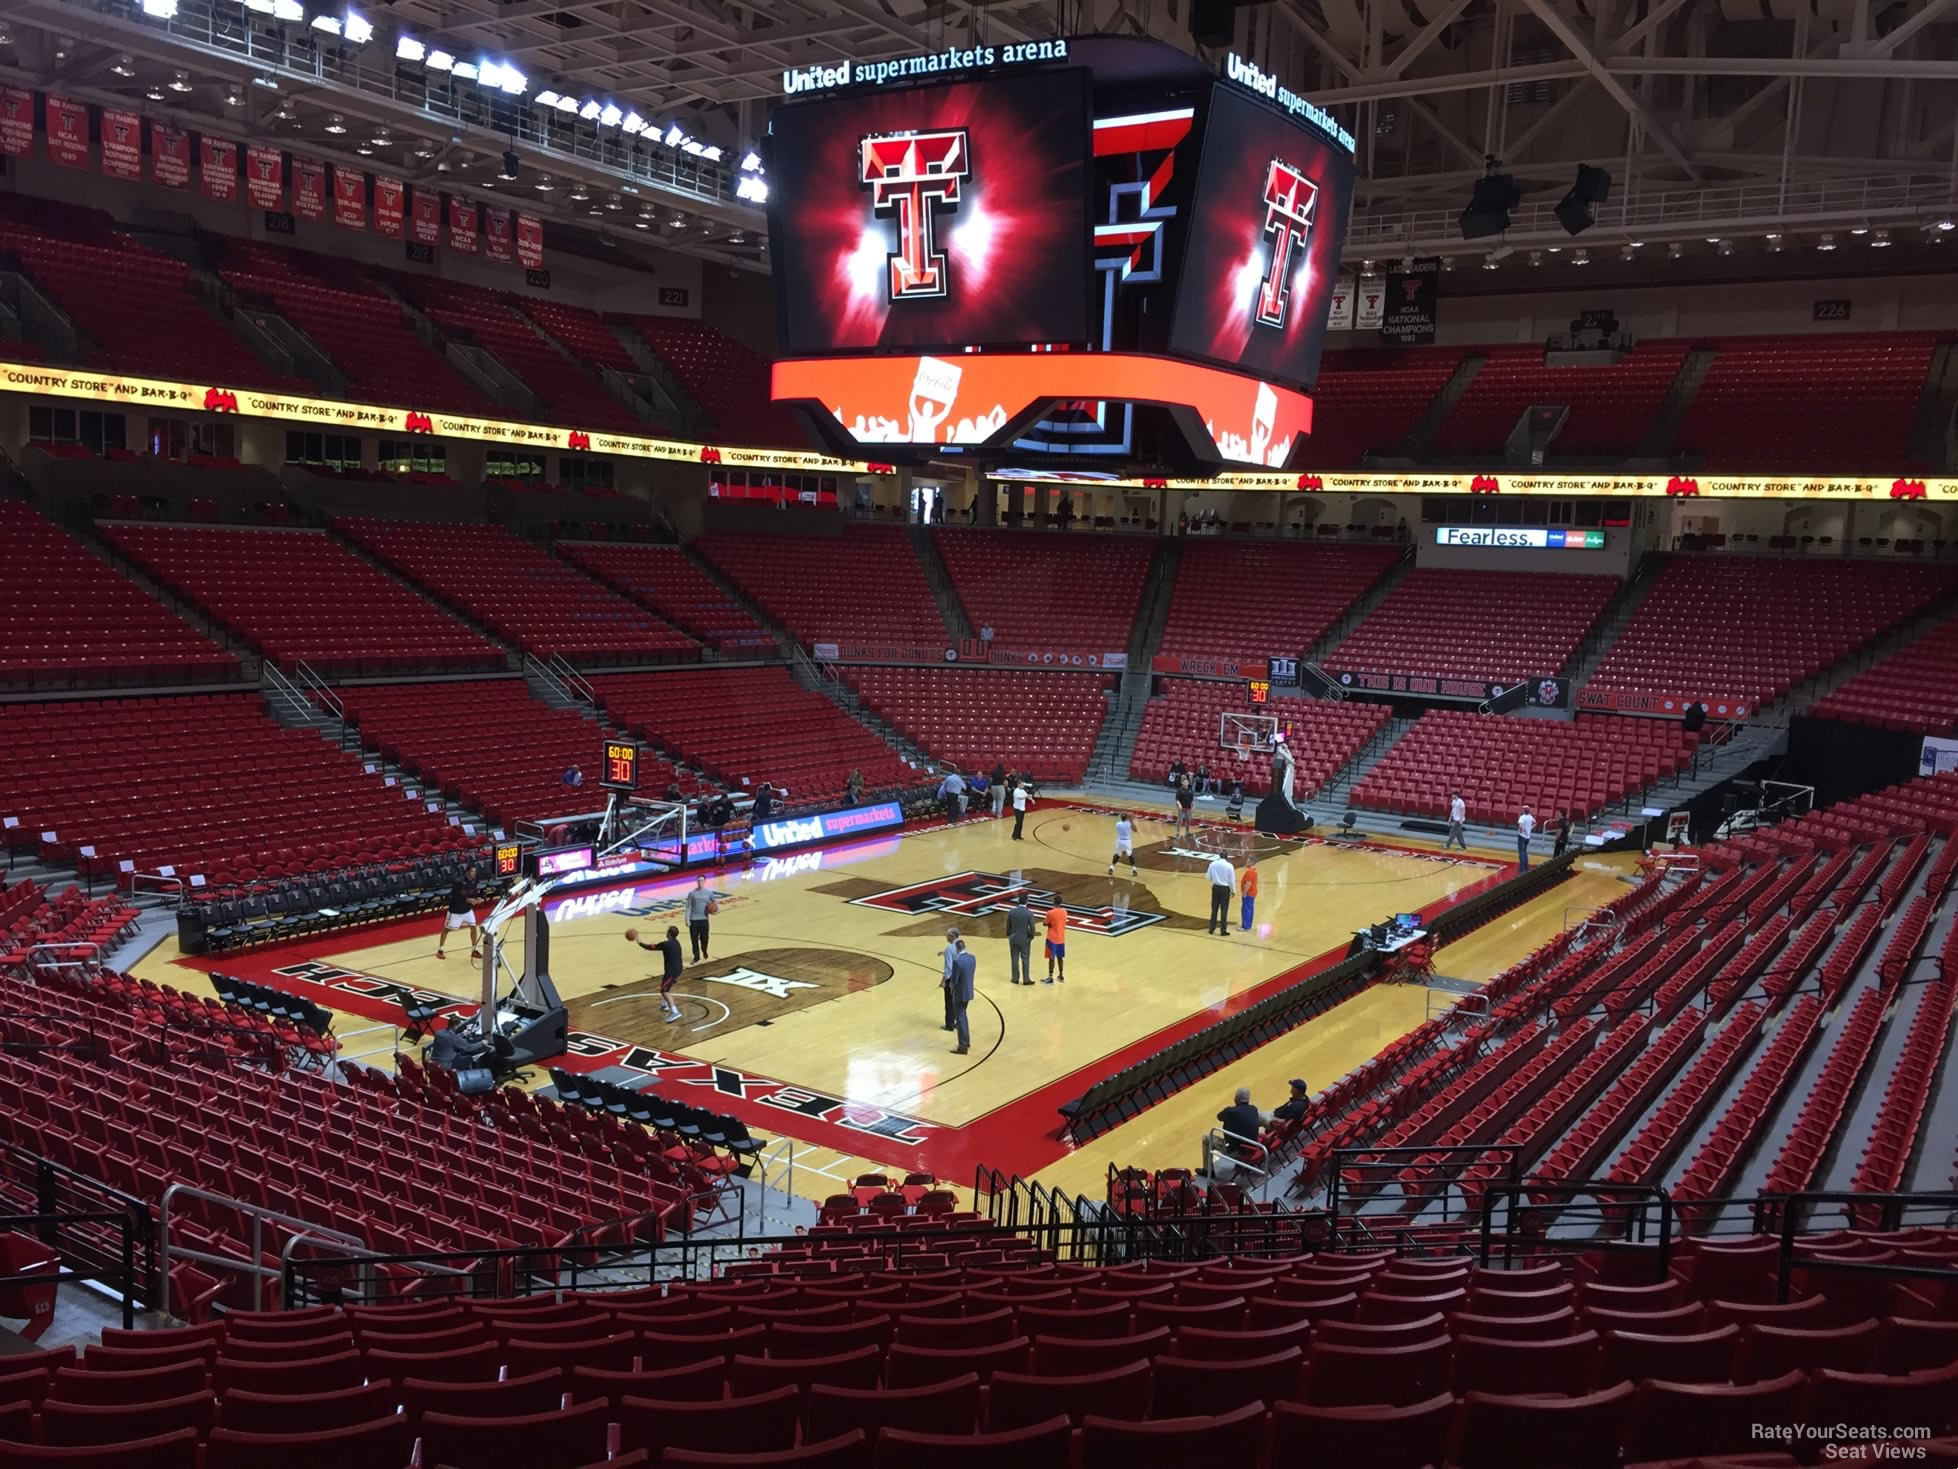 section 105, row 25 seat view  - united supermarkets arena